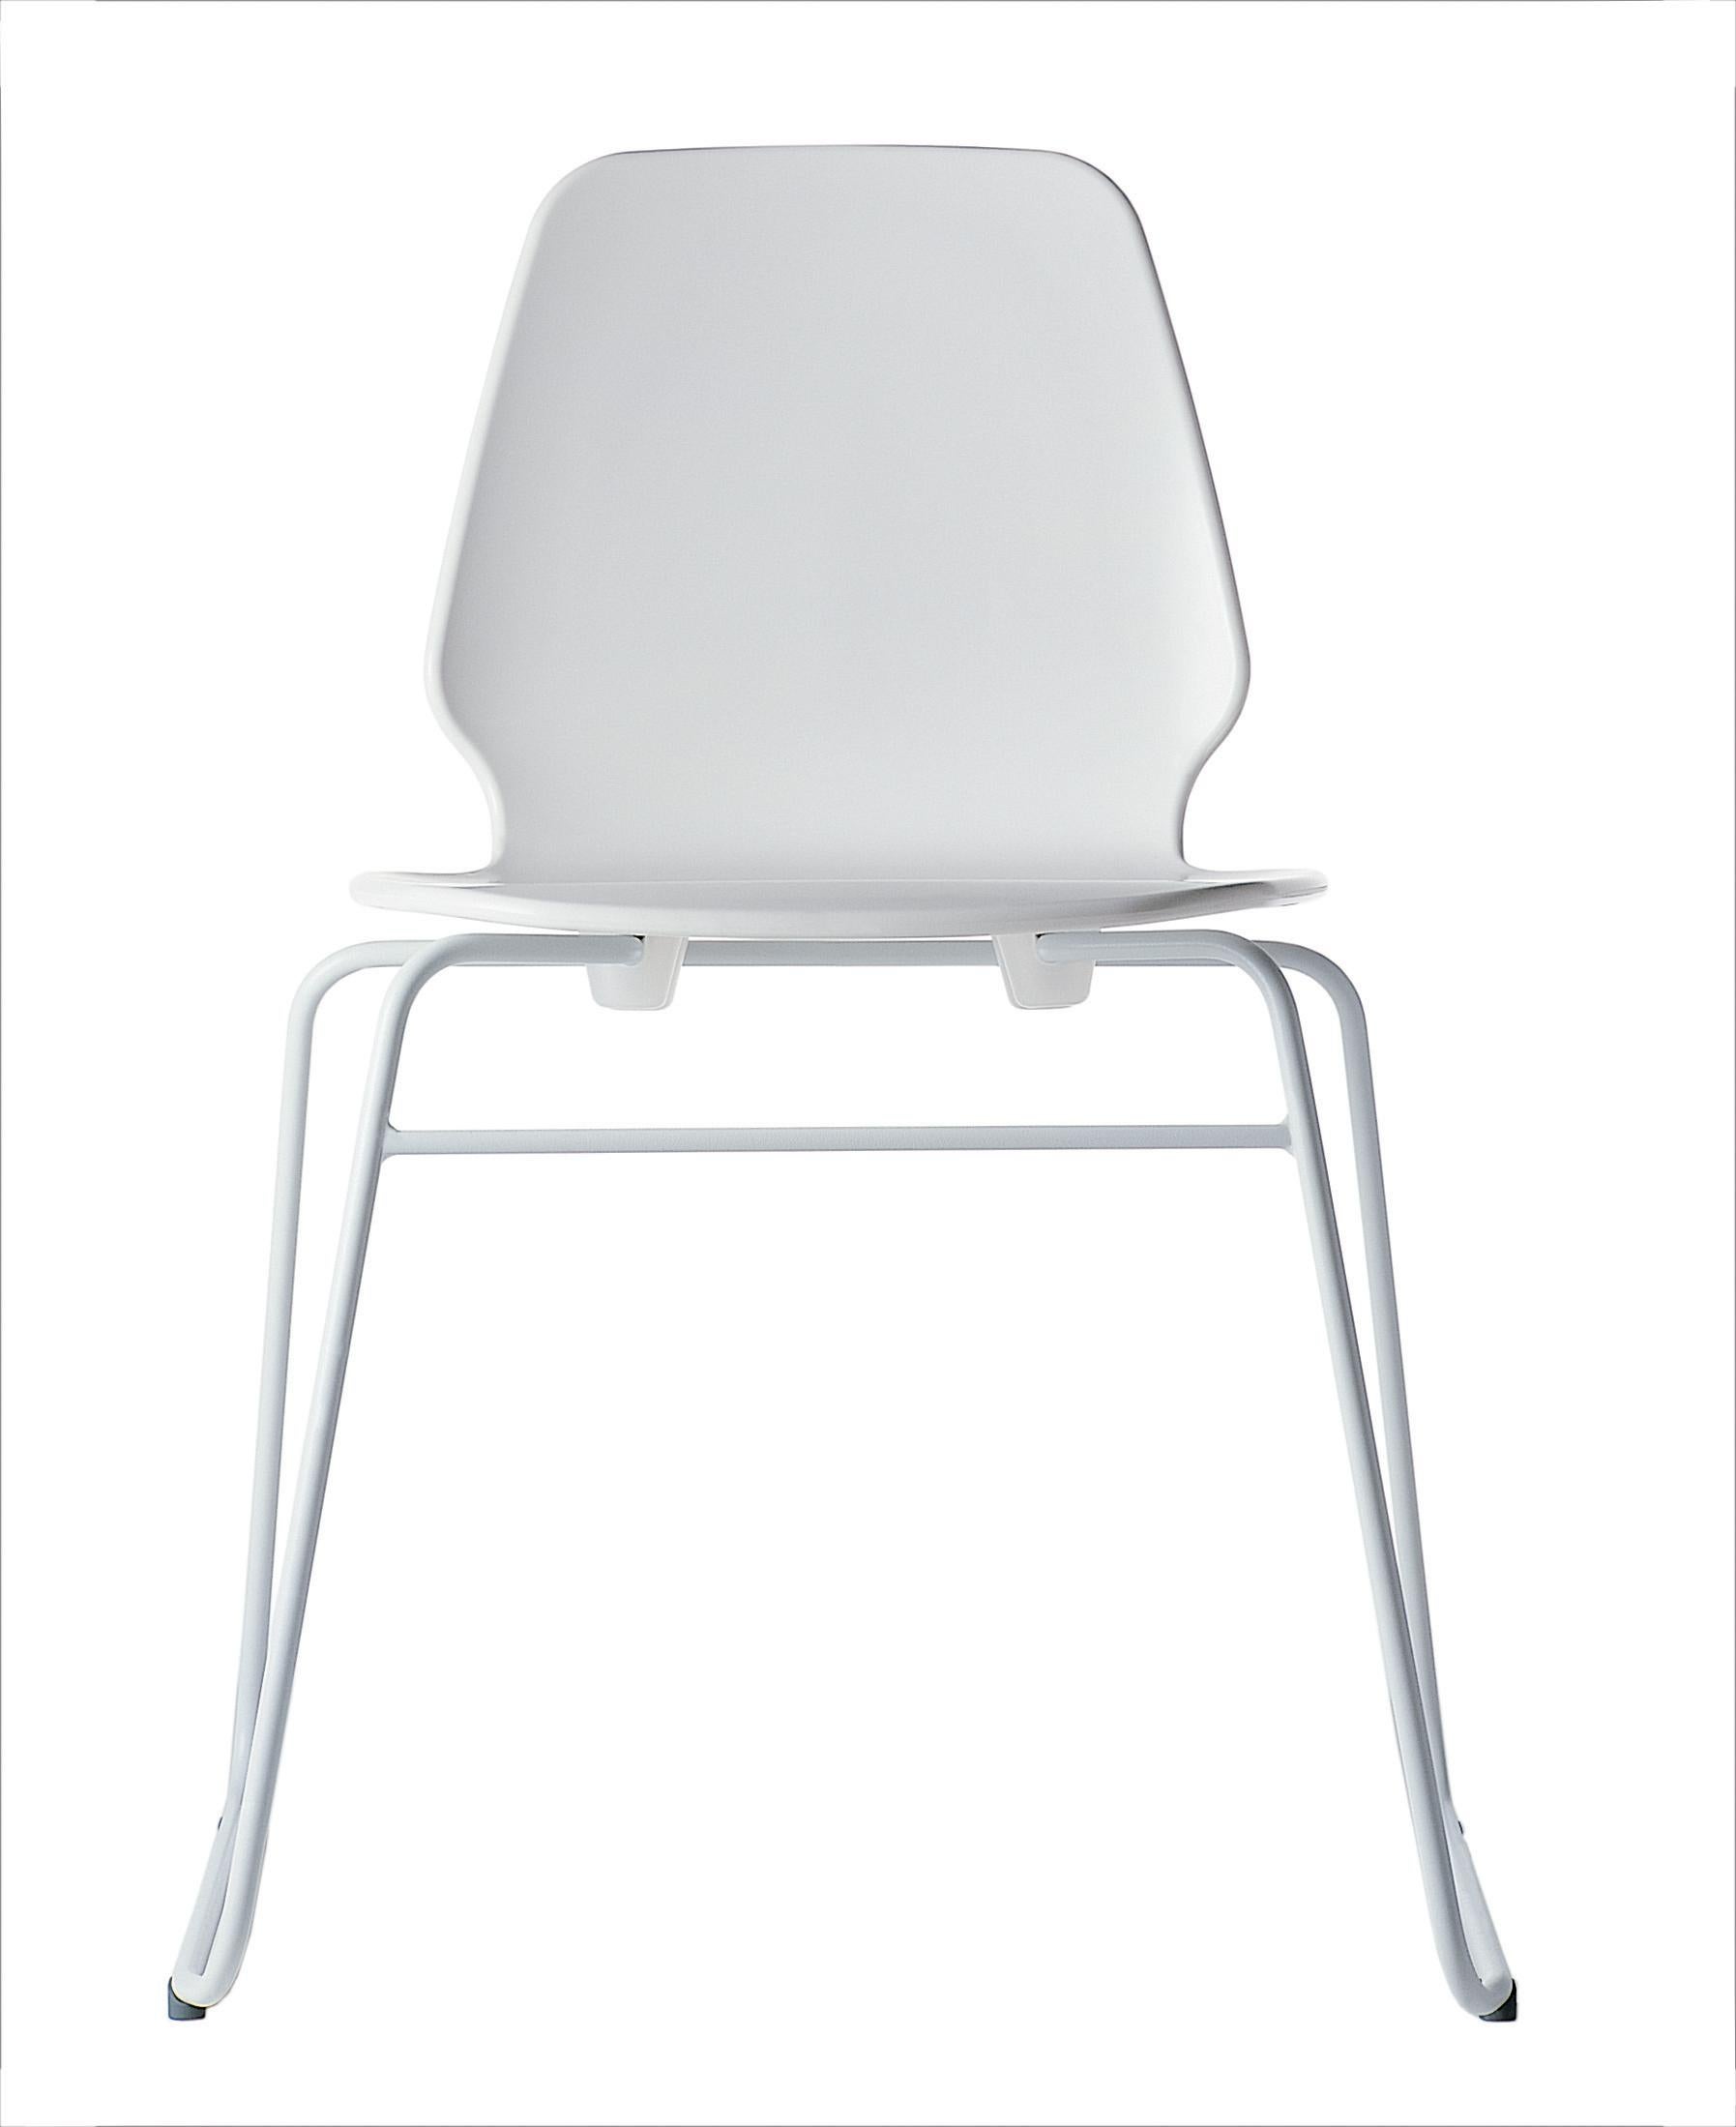 Alias 531 Selinunte Sledge Chair in White Seat and Lacquered Steel Frame by Alfredo Häberli

Stacking chair with structure in lacquered or chromed steel; seat and back in solid plastic material.

Born in Buenos Aires in 1964, he moved to Zurich